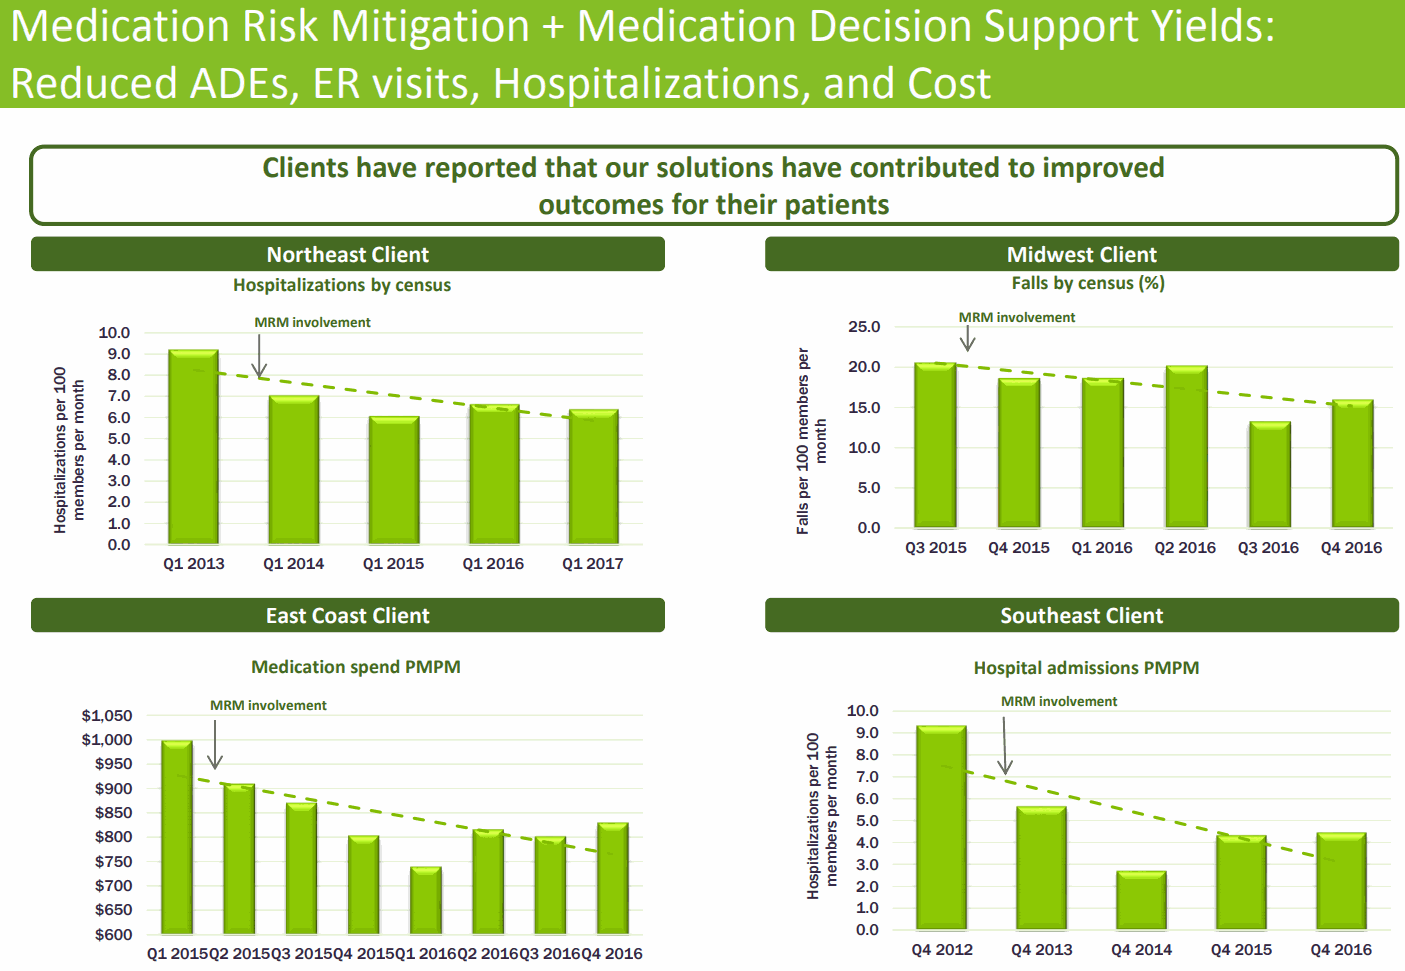 Medication Risk Mitigation + Medication Decision Support Yields: Reduced ADEs, ER visits, Hospitalizations, and Cost